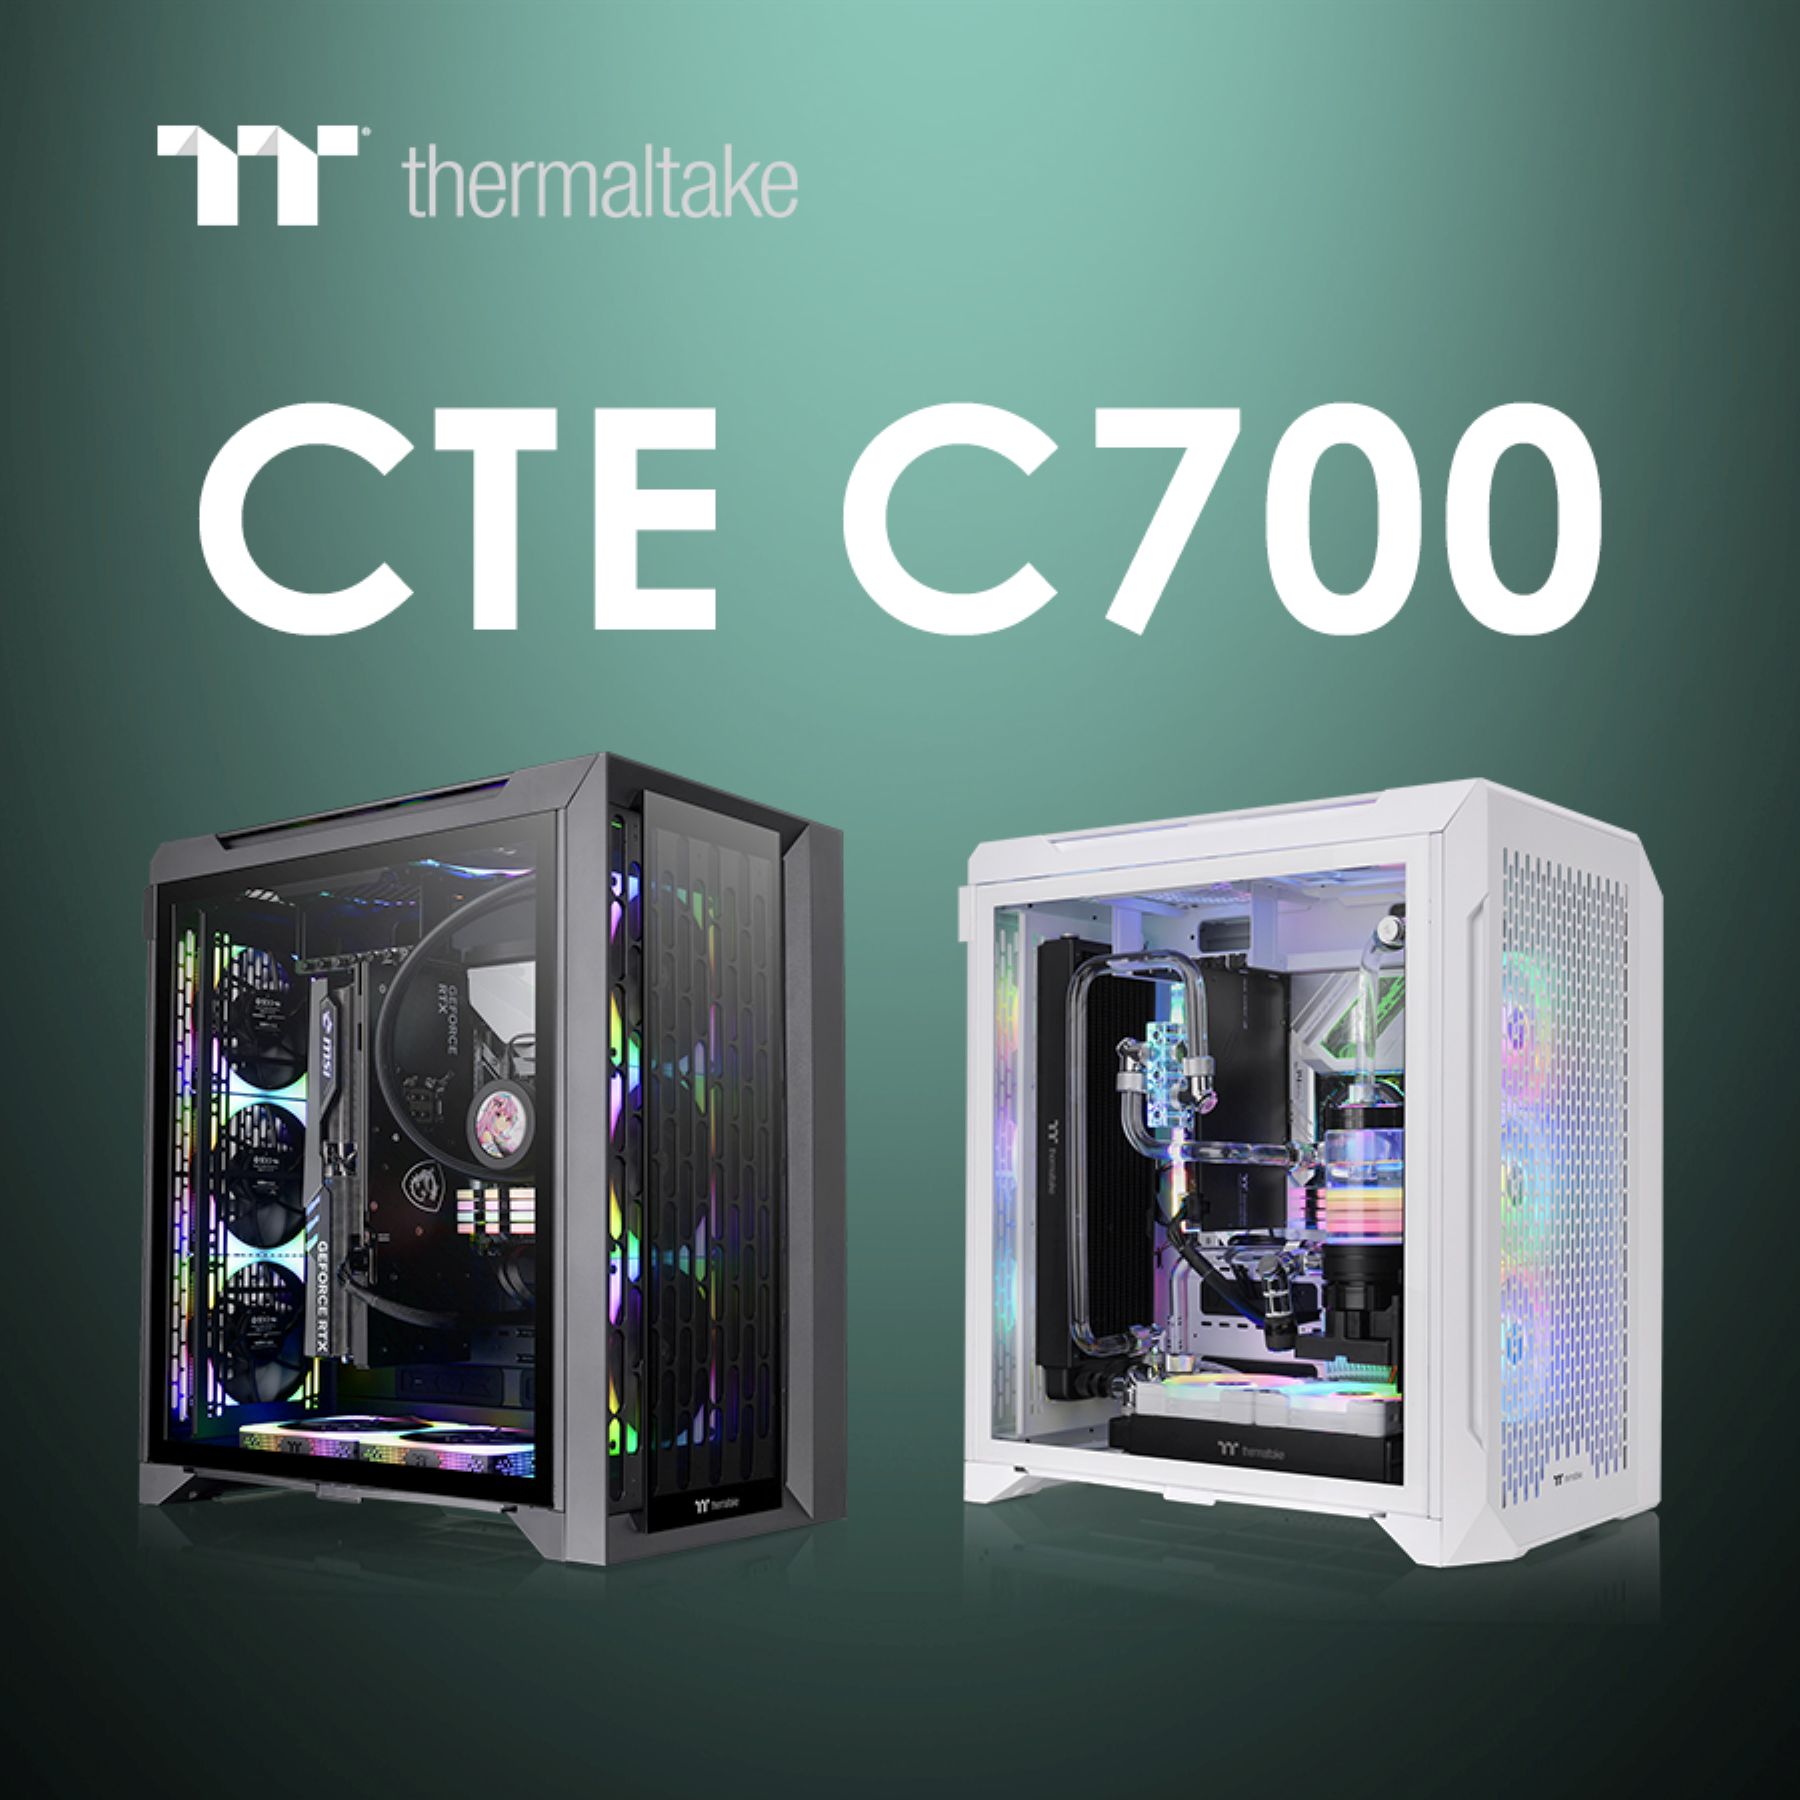 Thermaltake CTE C700 Mid Tower Chassis Series Is Ready for Purchase